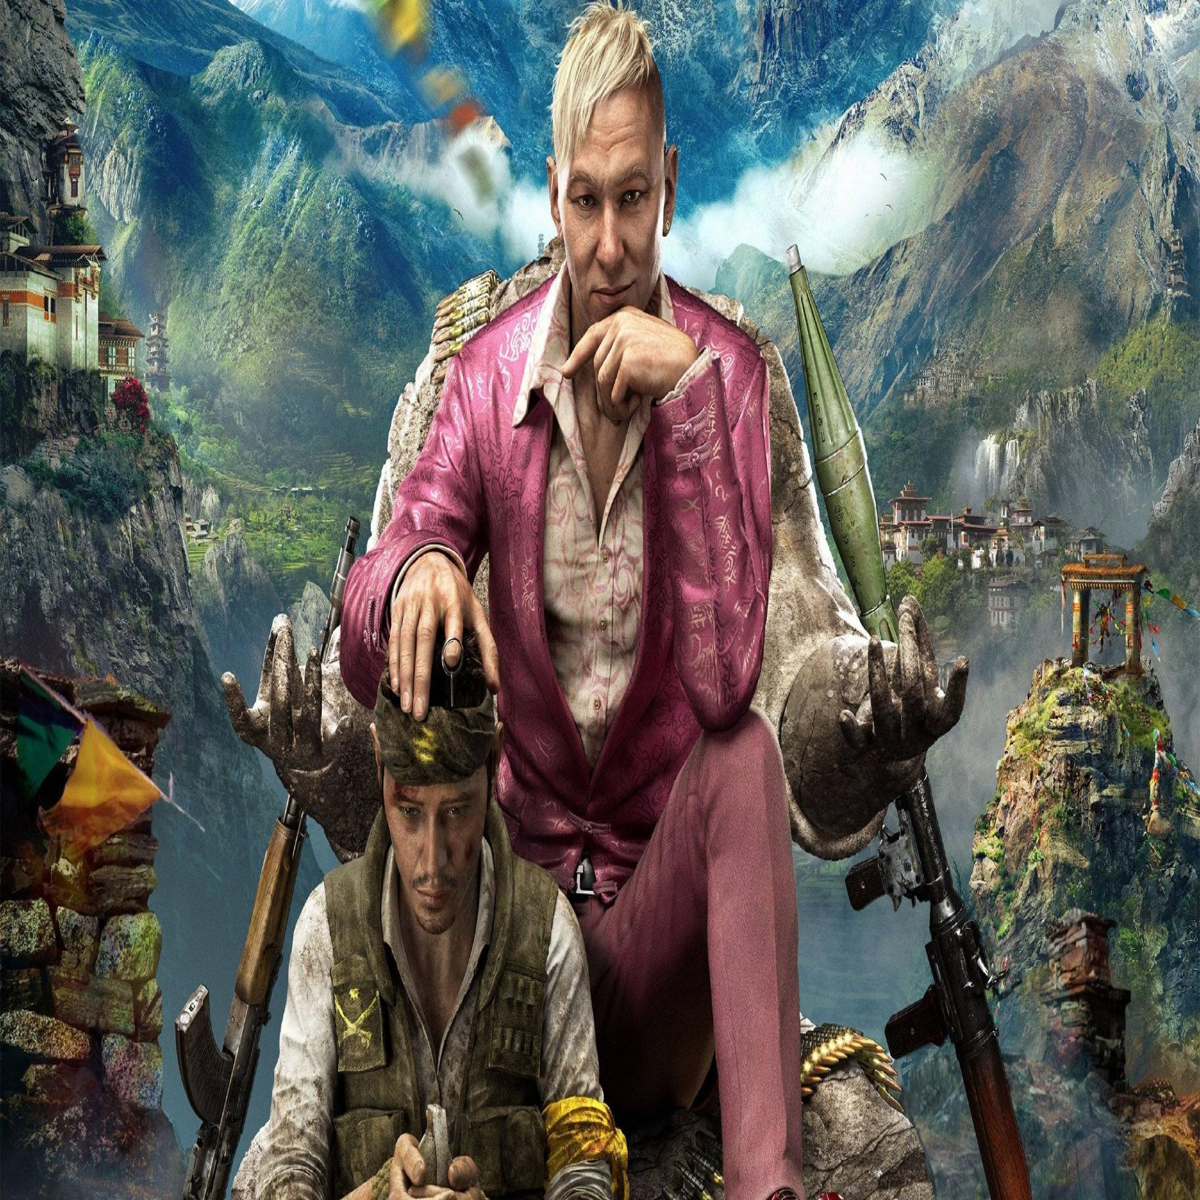 Stay Cool with Prime Gaming's June Offerings Including Far Cry 4